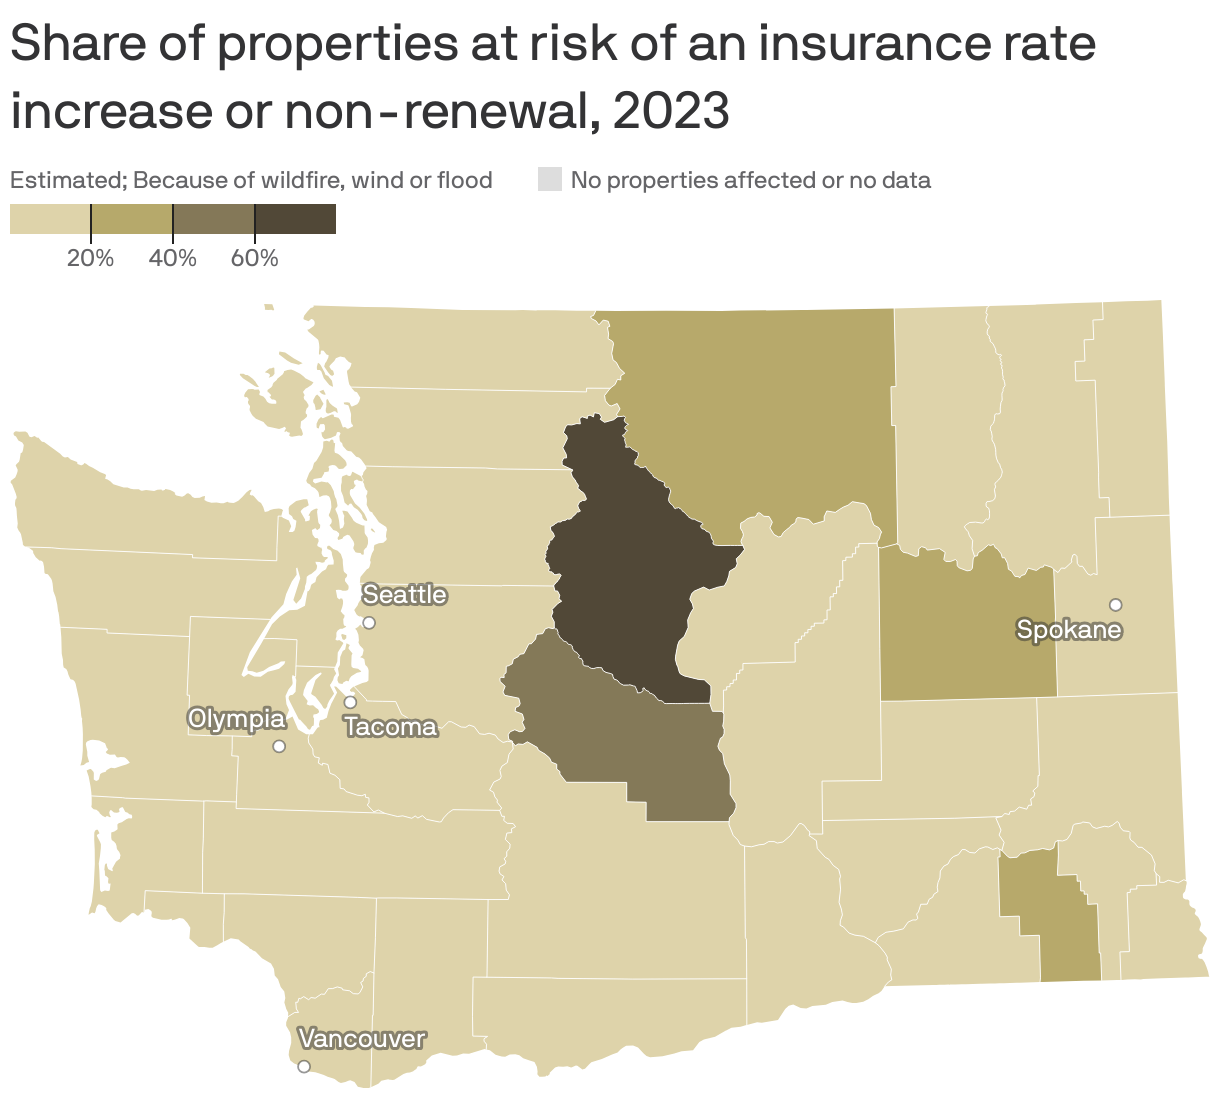 Share of properties at risk of an insurance rate increase or non-renewal, 2023